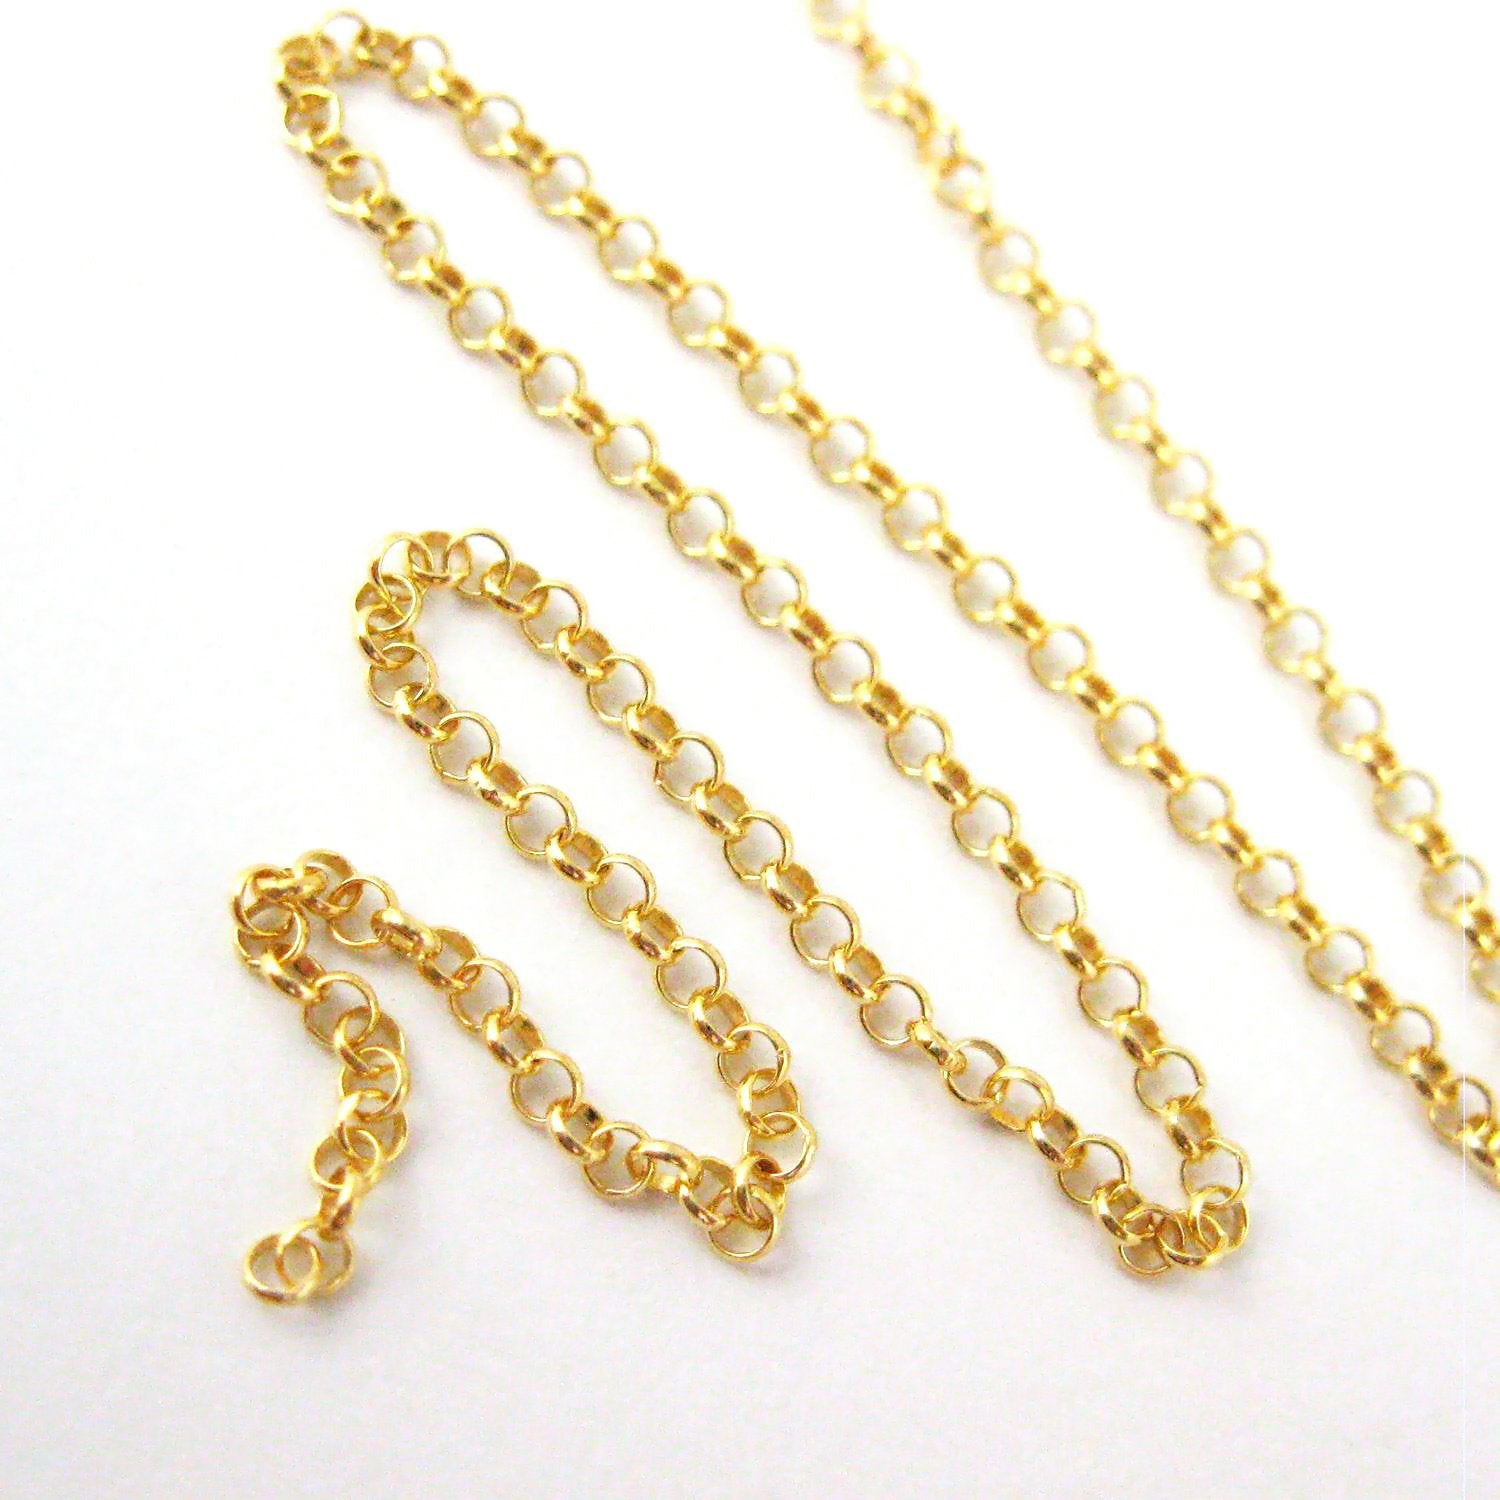 10K Yellow Gold 2mm Rolo Chain